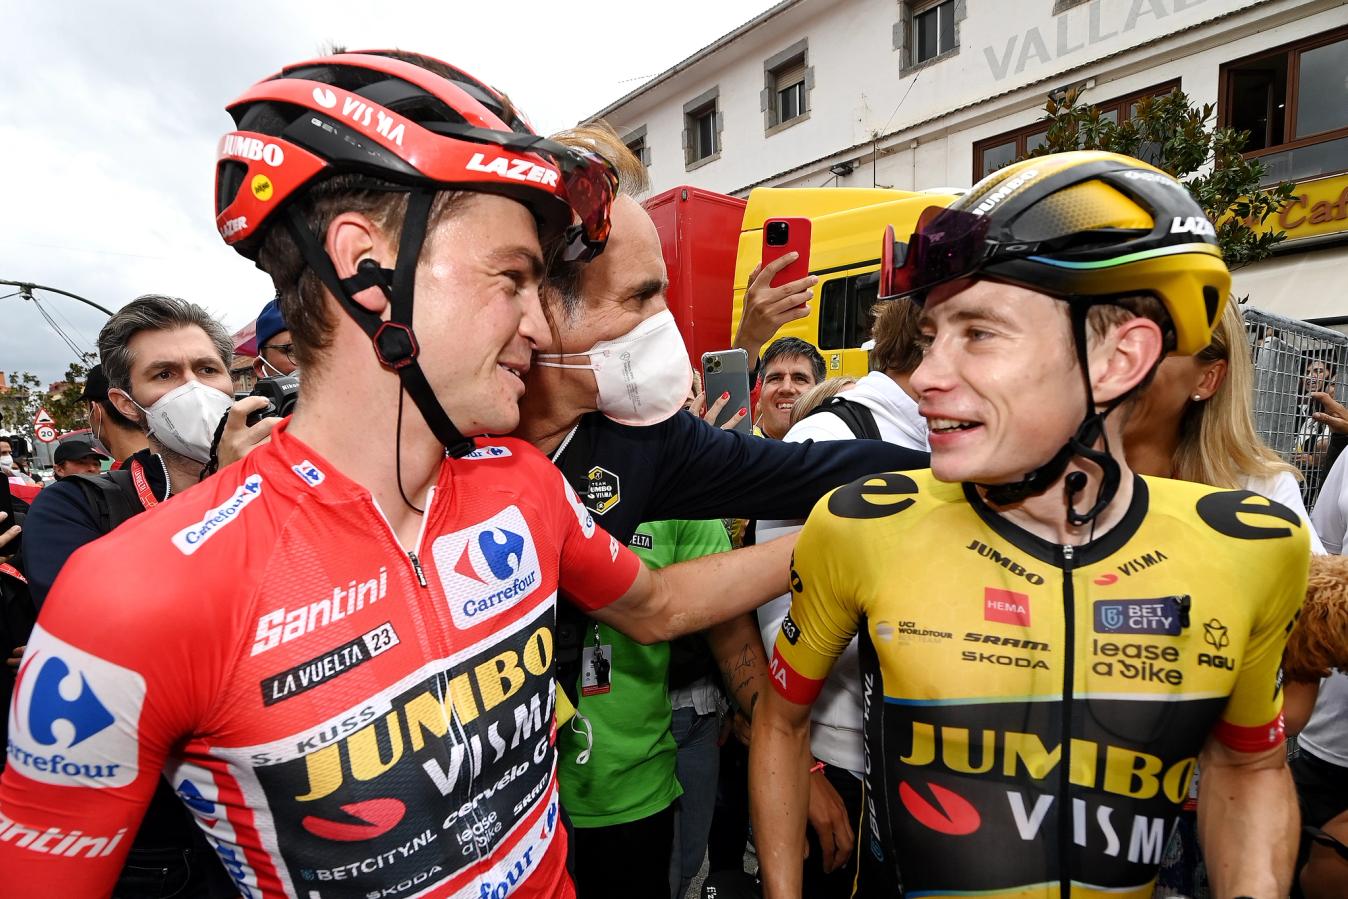 Kuss and Vingegaard after the American clinched the Vuelta victory